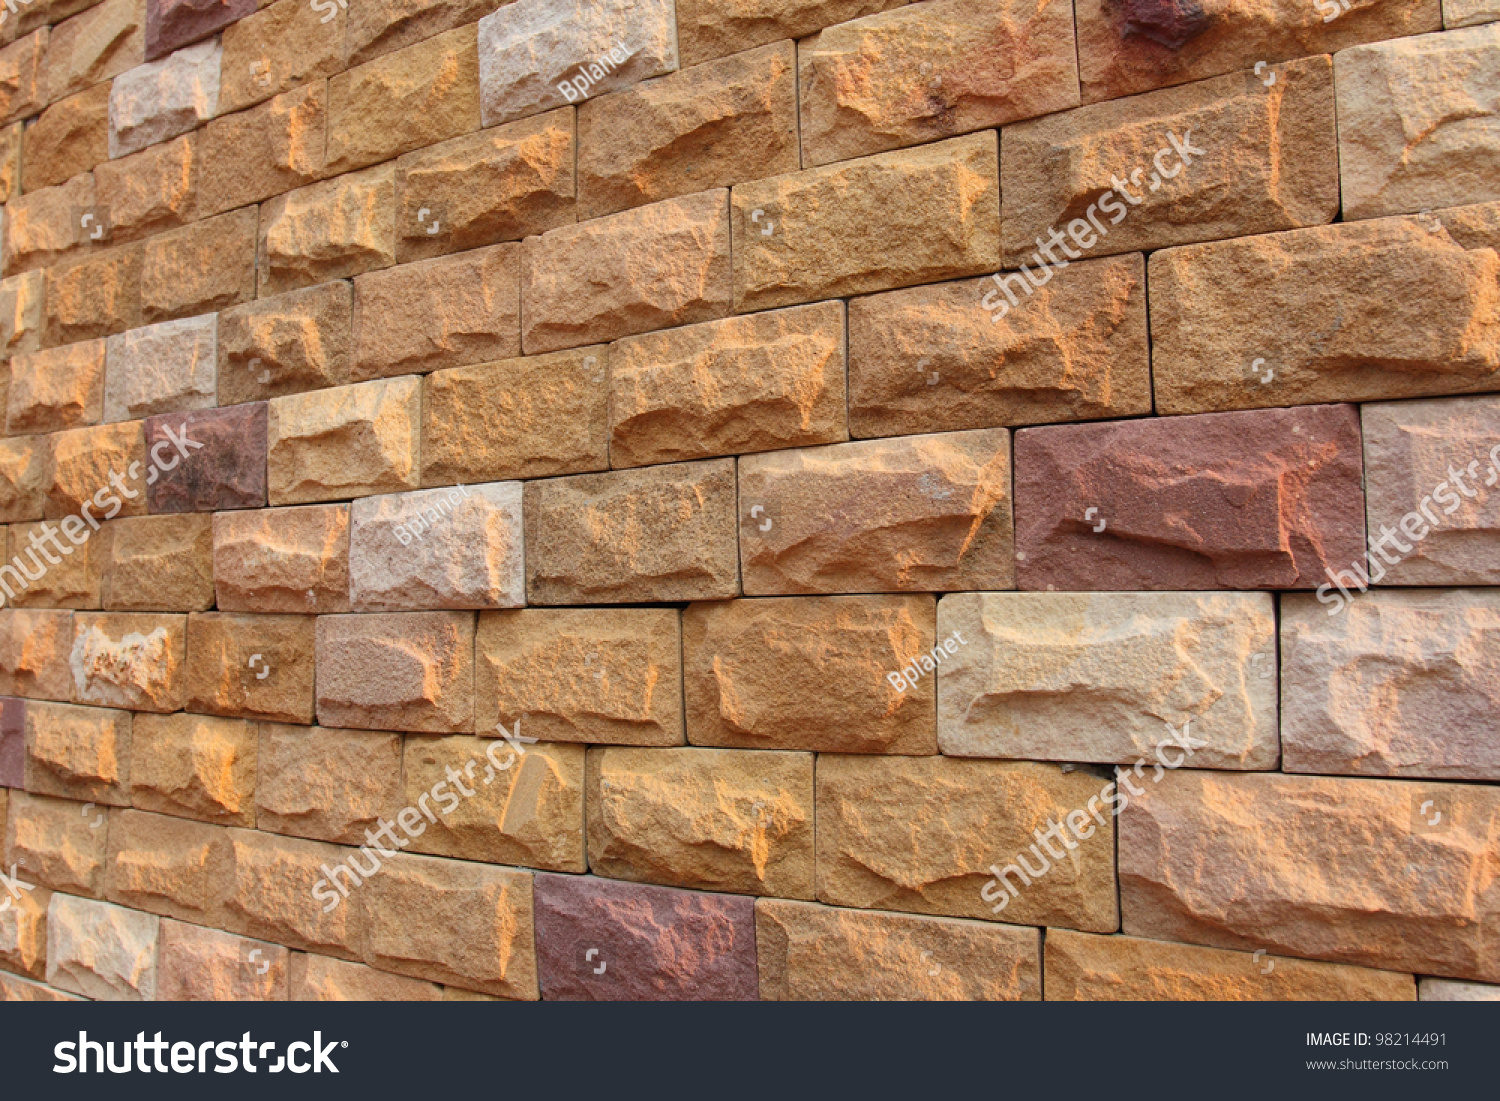 Stone Wall Perspective Background. Stock Photo 98214491 : Shutterstock